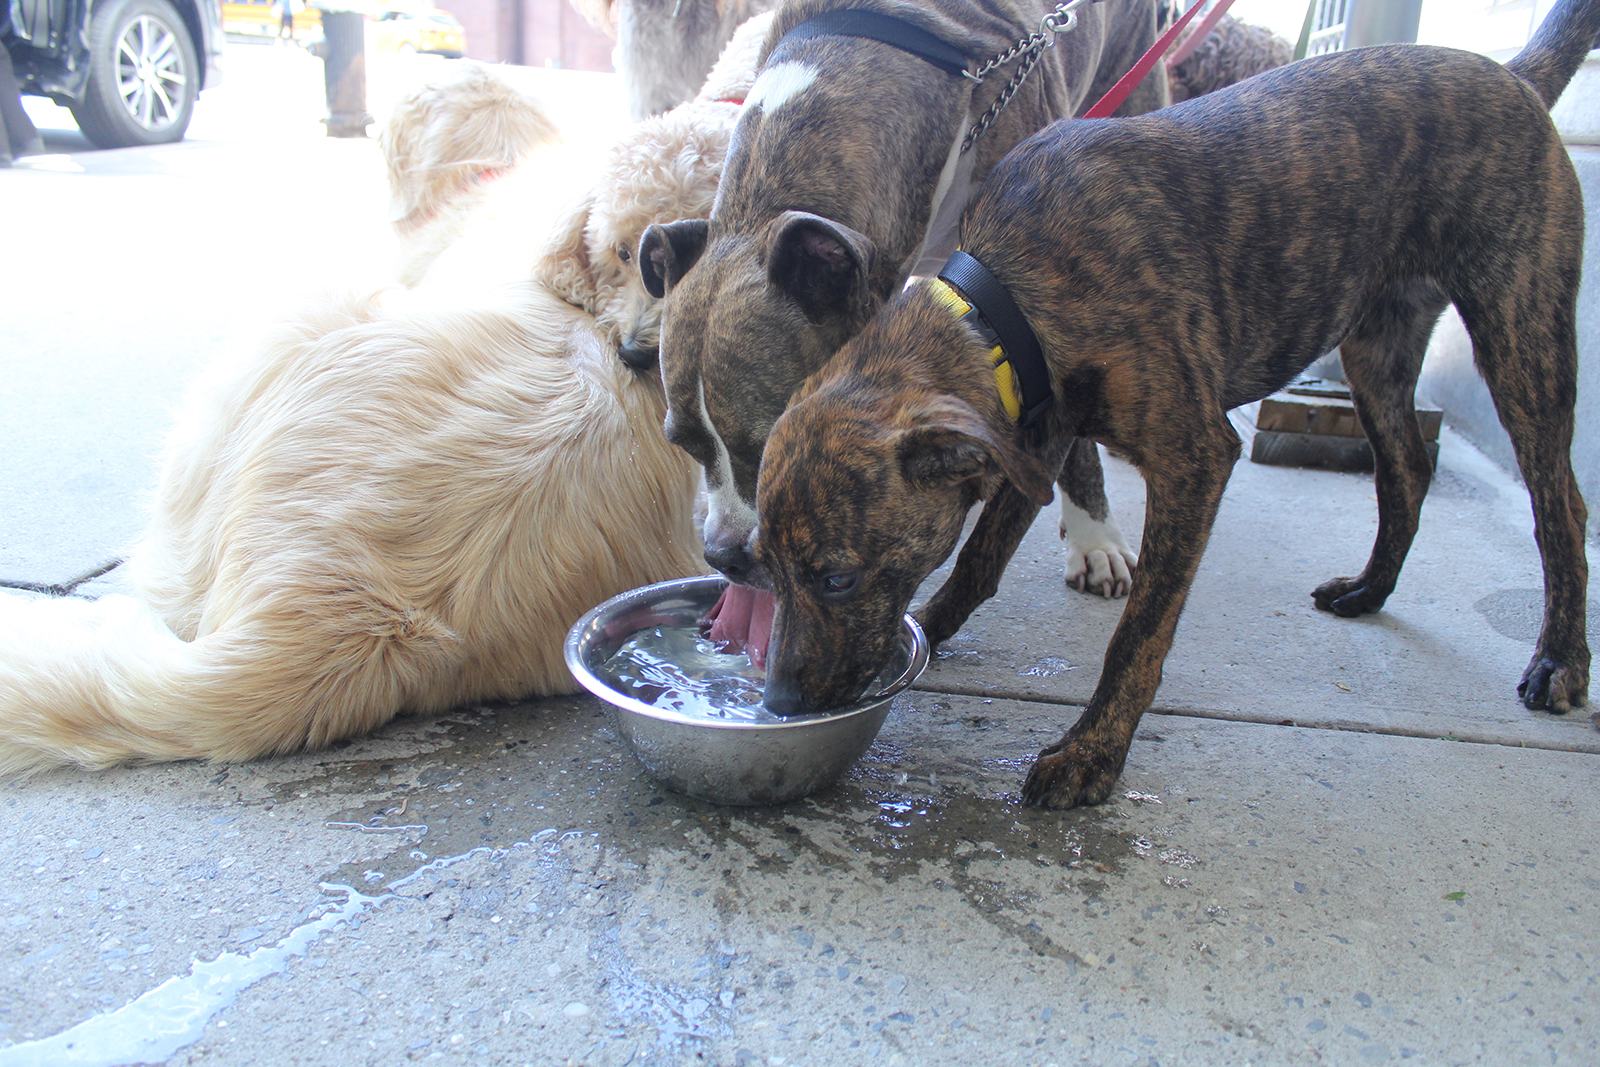 Brindle Coated Dogs Drinking from a Bowl of Water